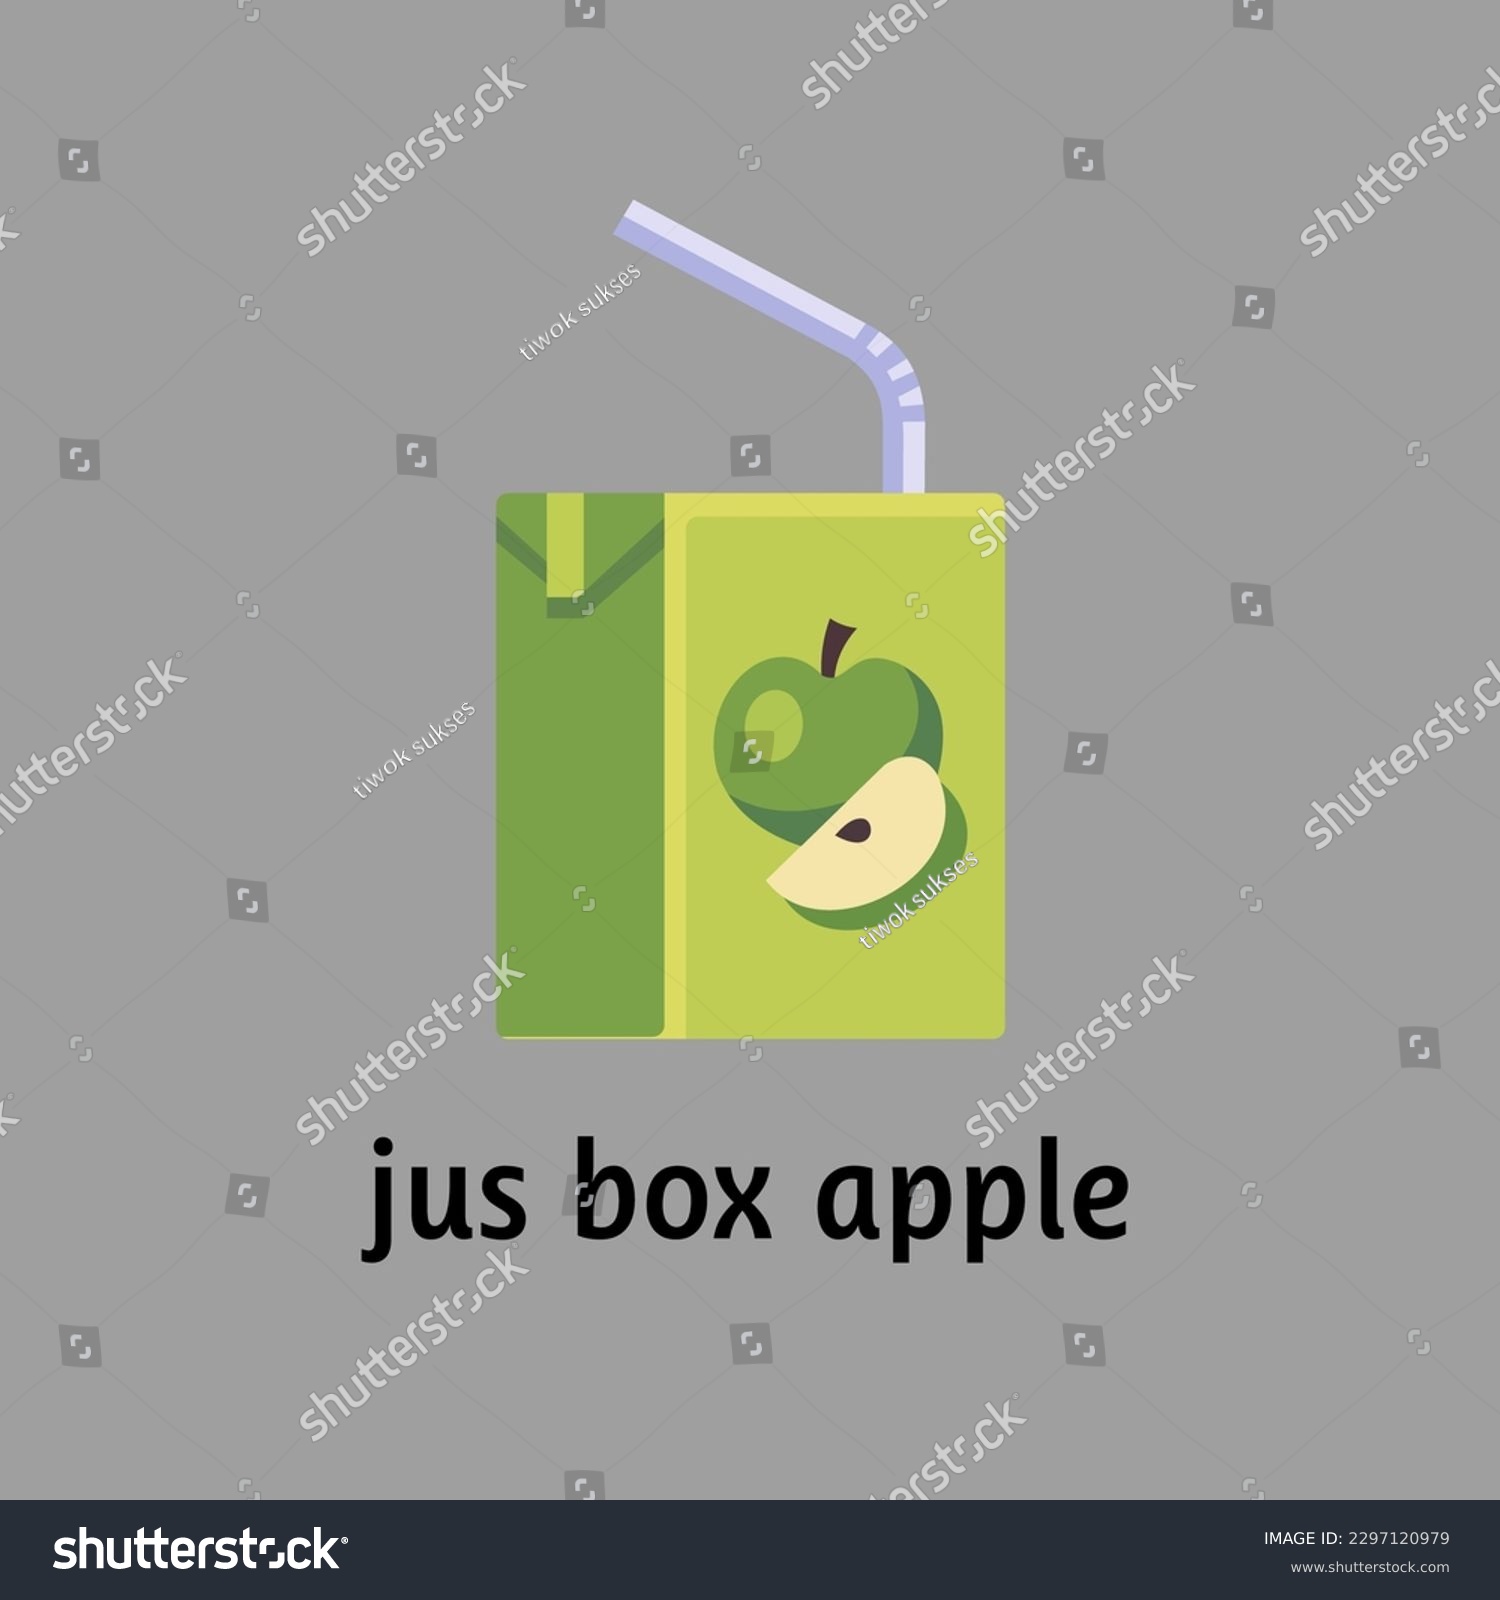 SVG of Apple Juice box flat icon. Simple vector illustration of juice pack with straw isolated on gray background for design and web. svg